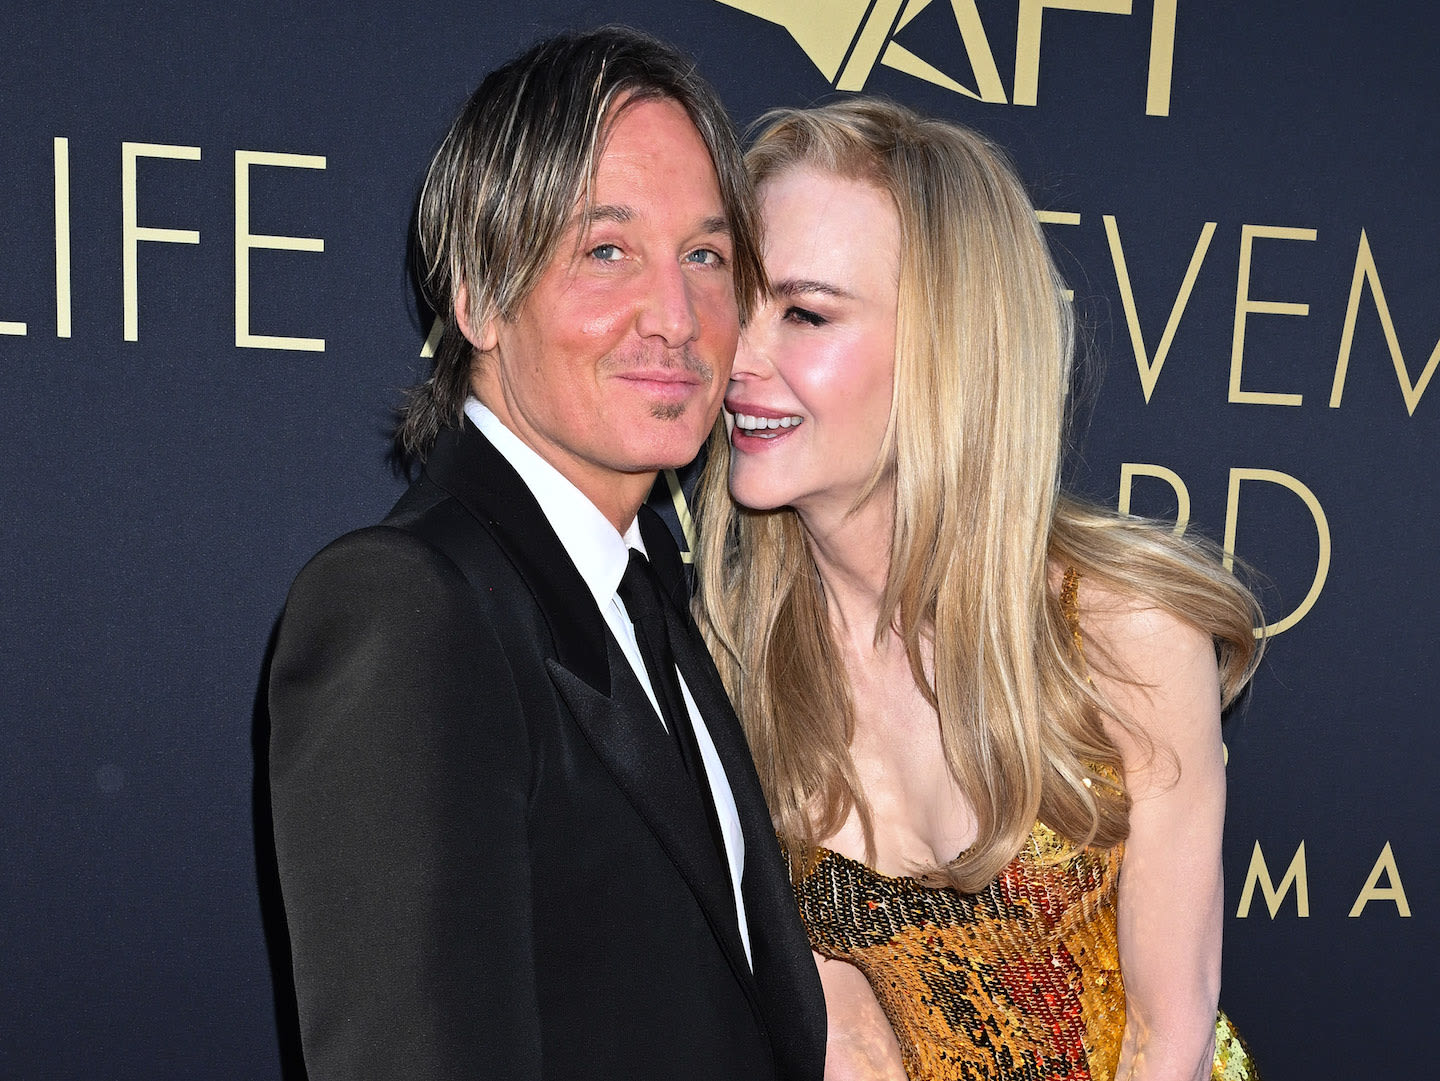 Keith Urban Revealed the Sweet Way Nicole Kidman’s Presence Affects His Shows